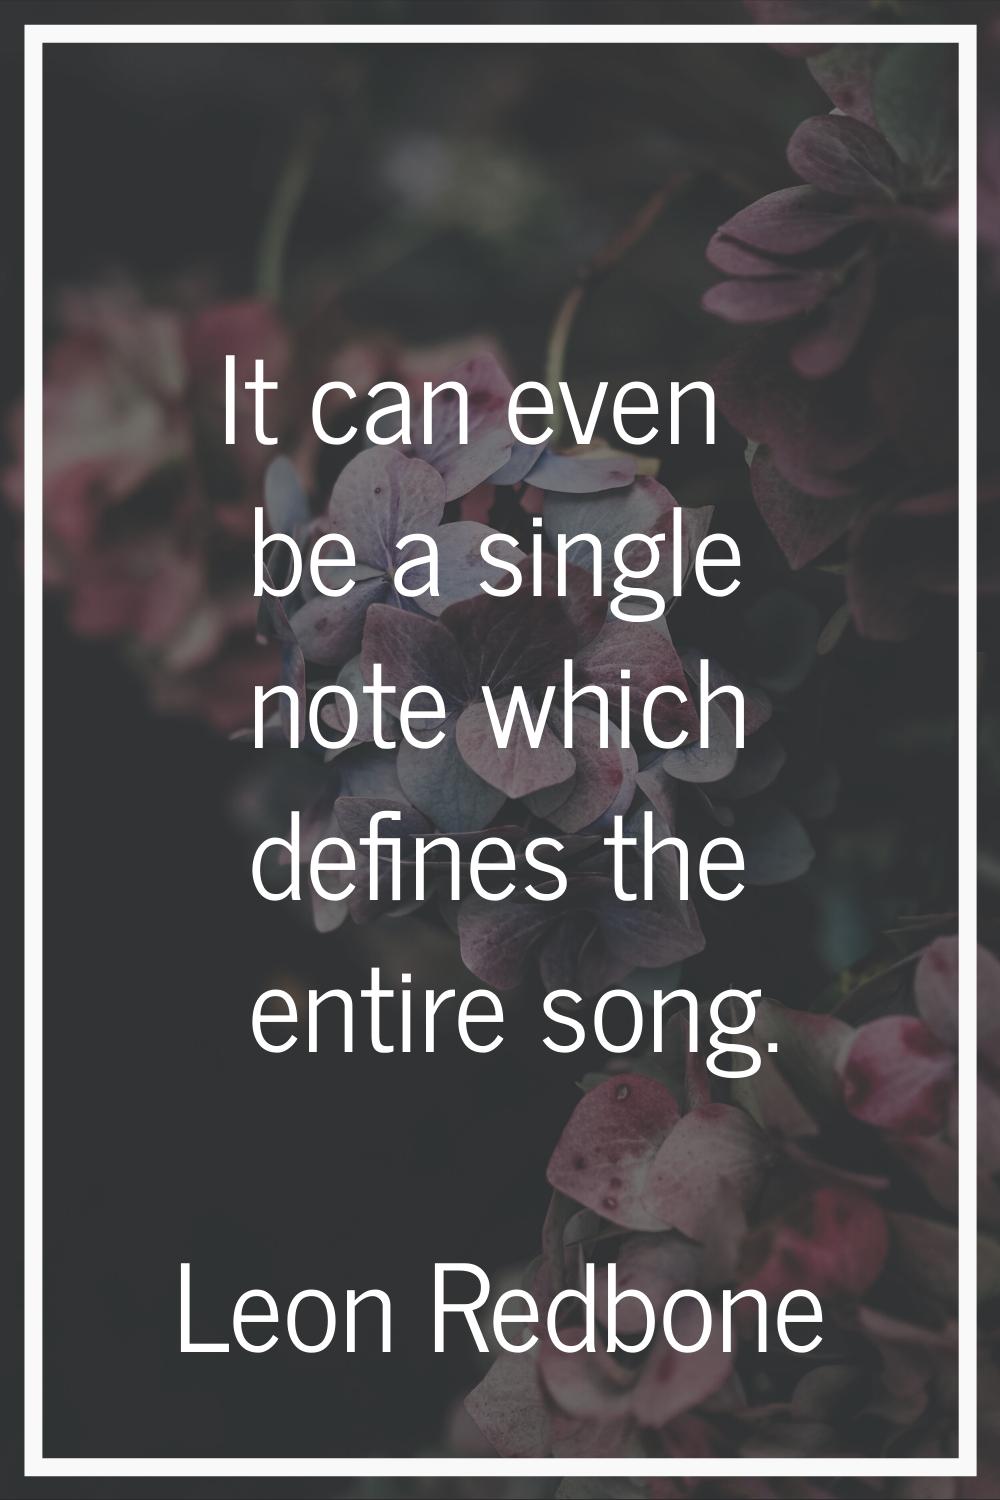 It can even be a single note which defines the entire song.